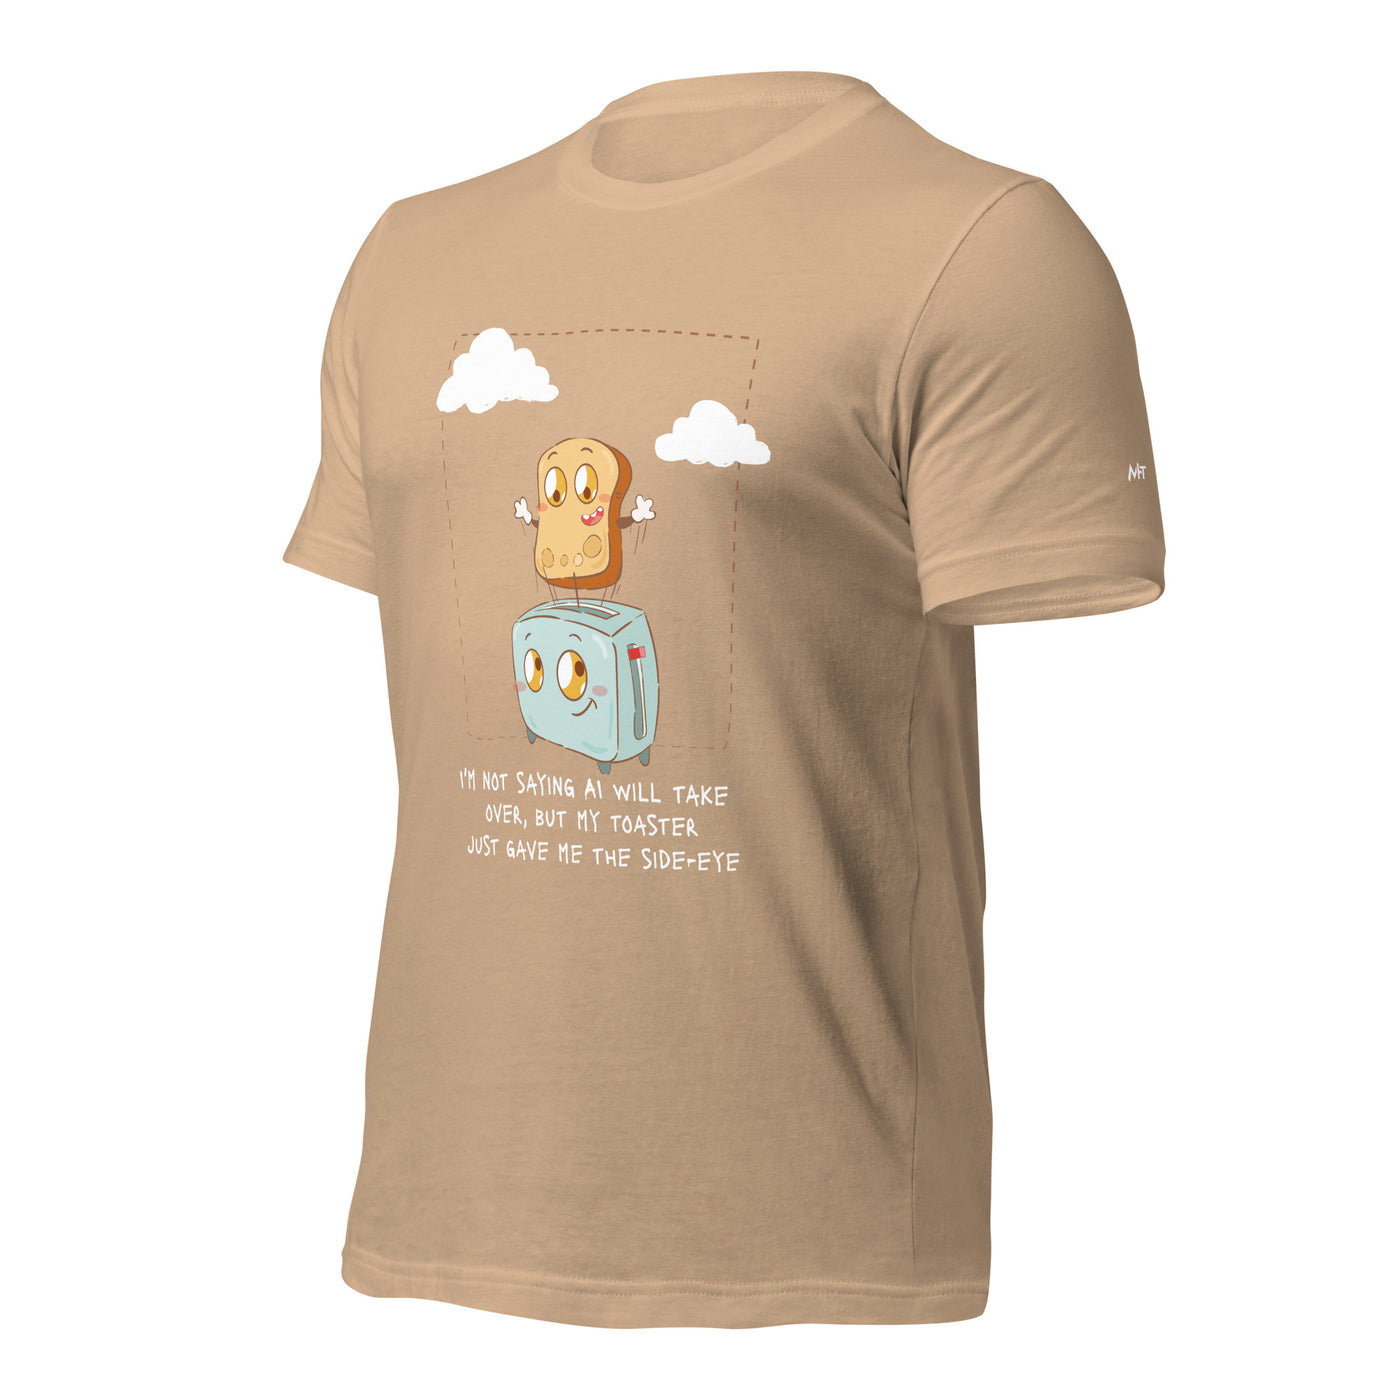 I'm not Saying AI will take over but my toaster - Unisex t-shirt